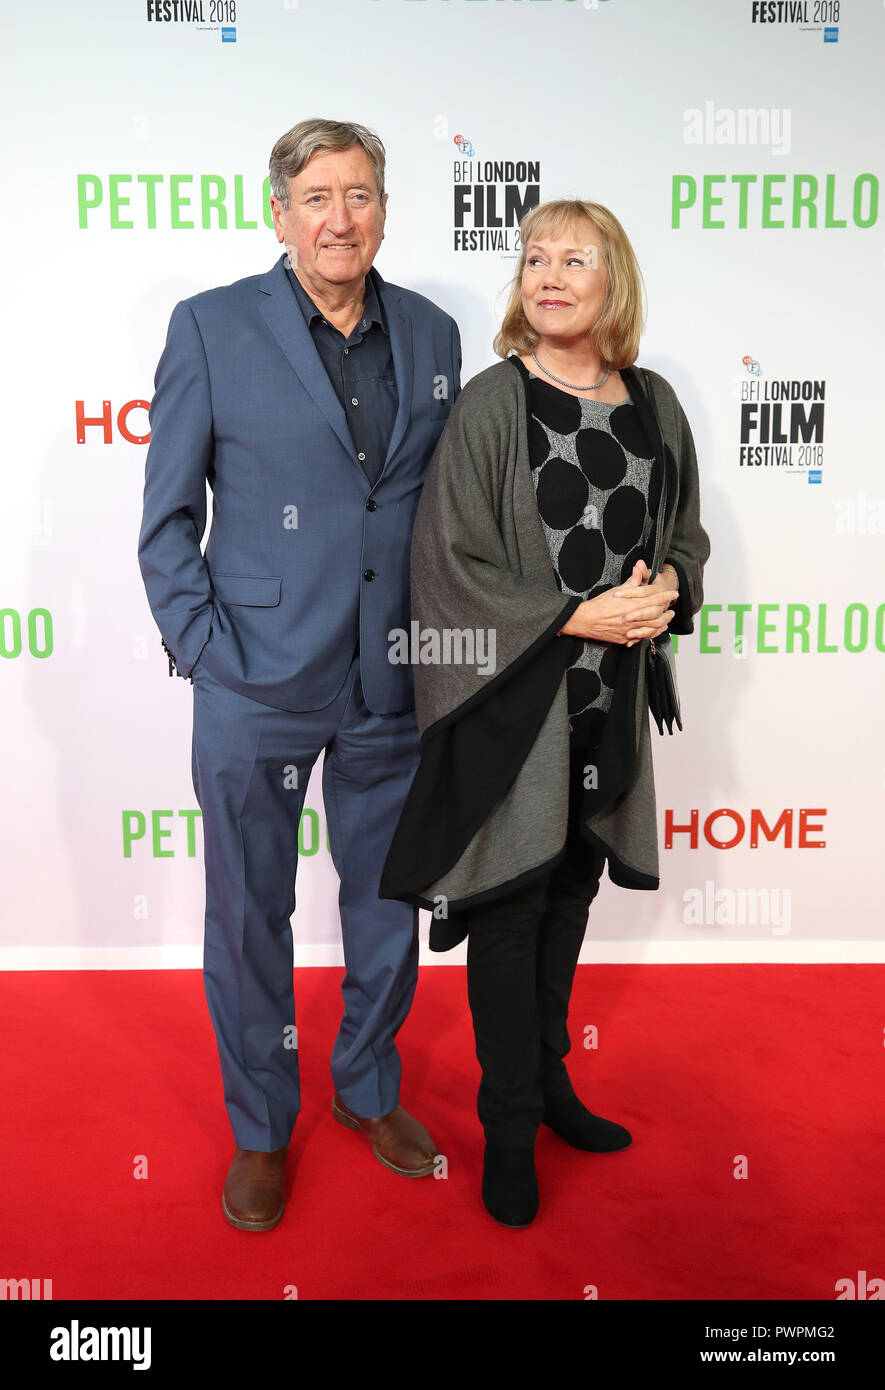 Philip Jackson arriving at the BFI London Film Festival premiere of Peterloo at HOME in Manchester. Stock Photo